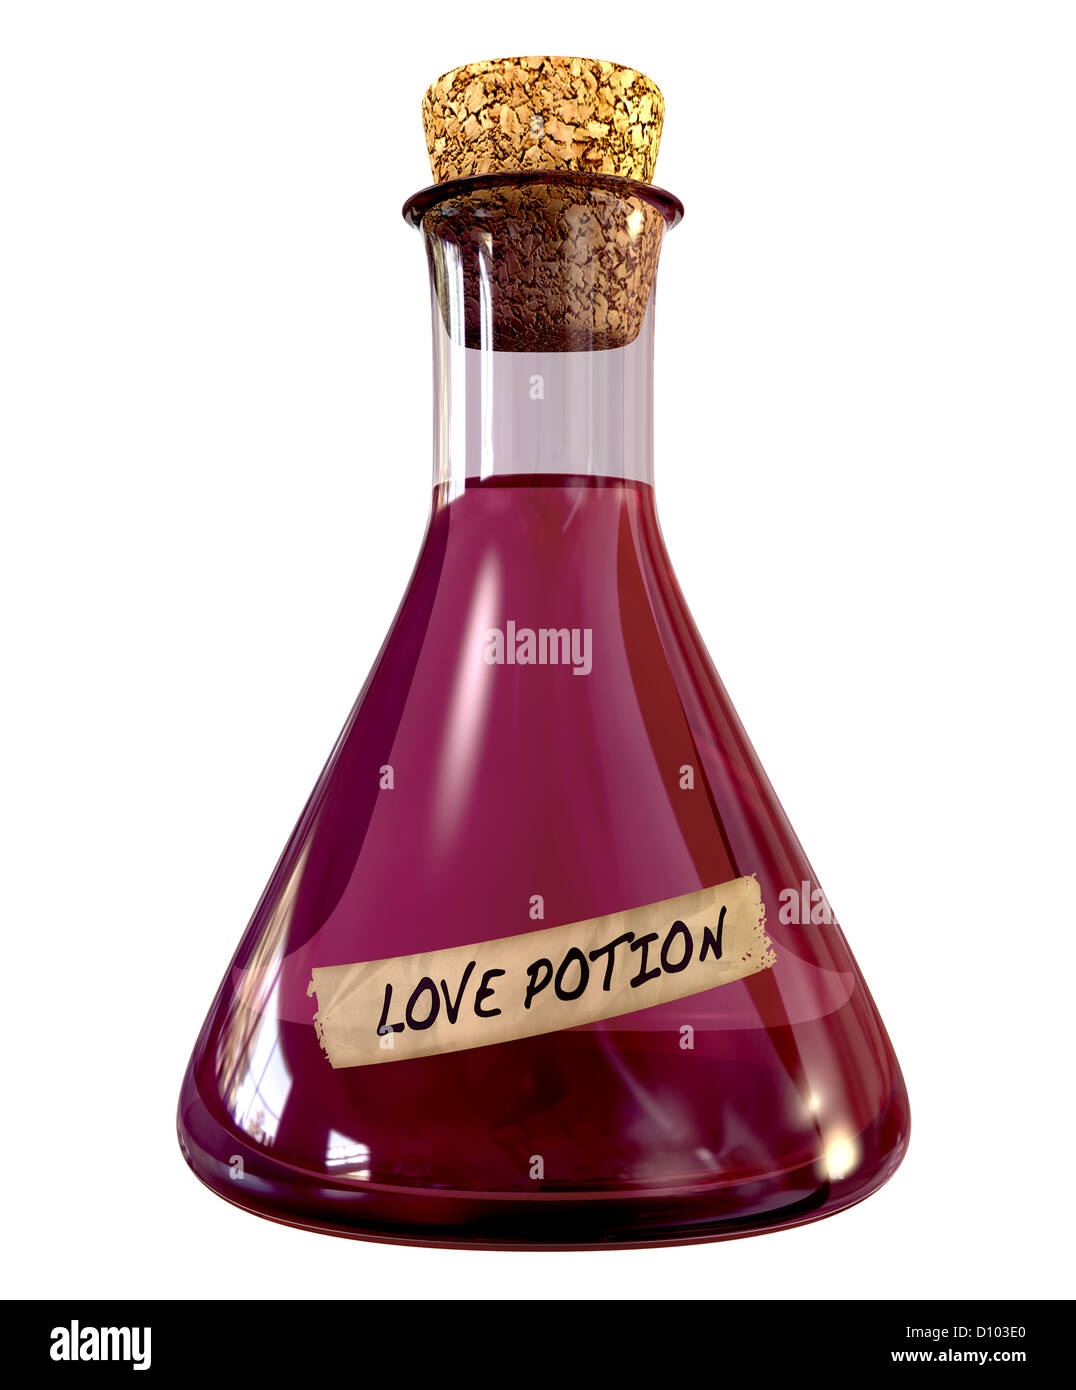 A regular chemistry glass bottle filled with a pink liquid called love potion and sealed with a cork on an isolated background Stock Photo